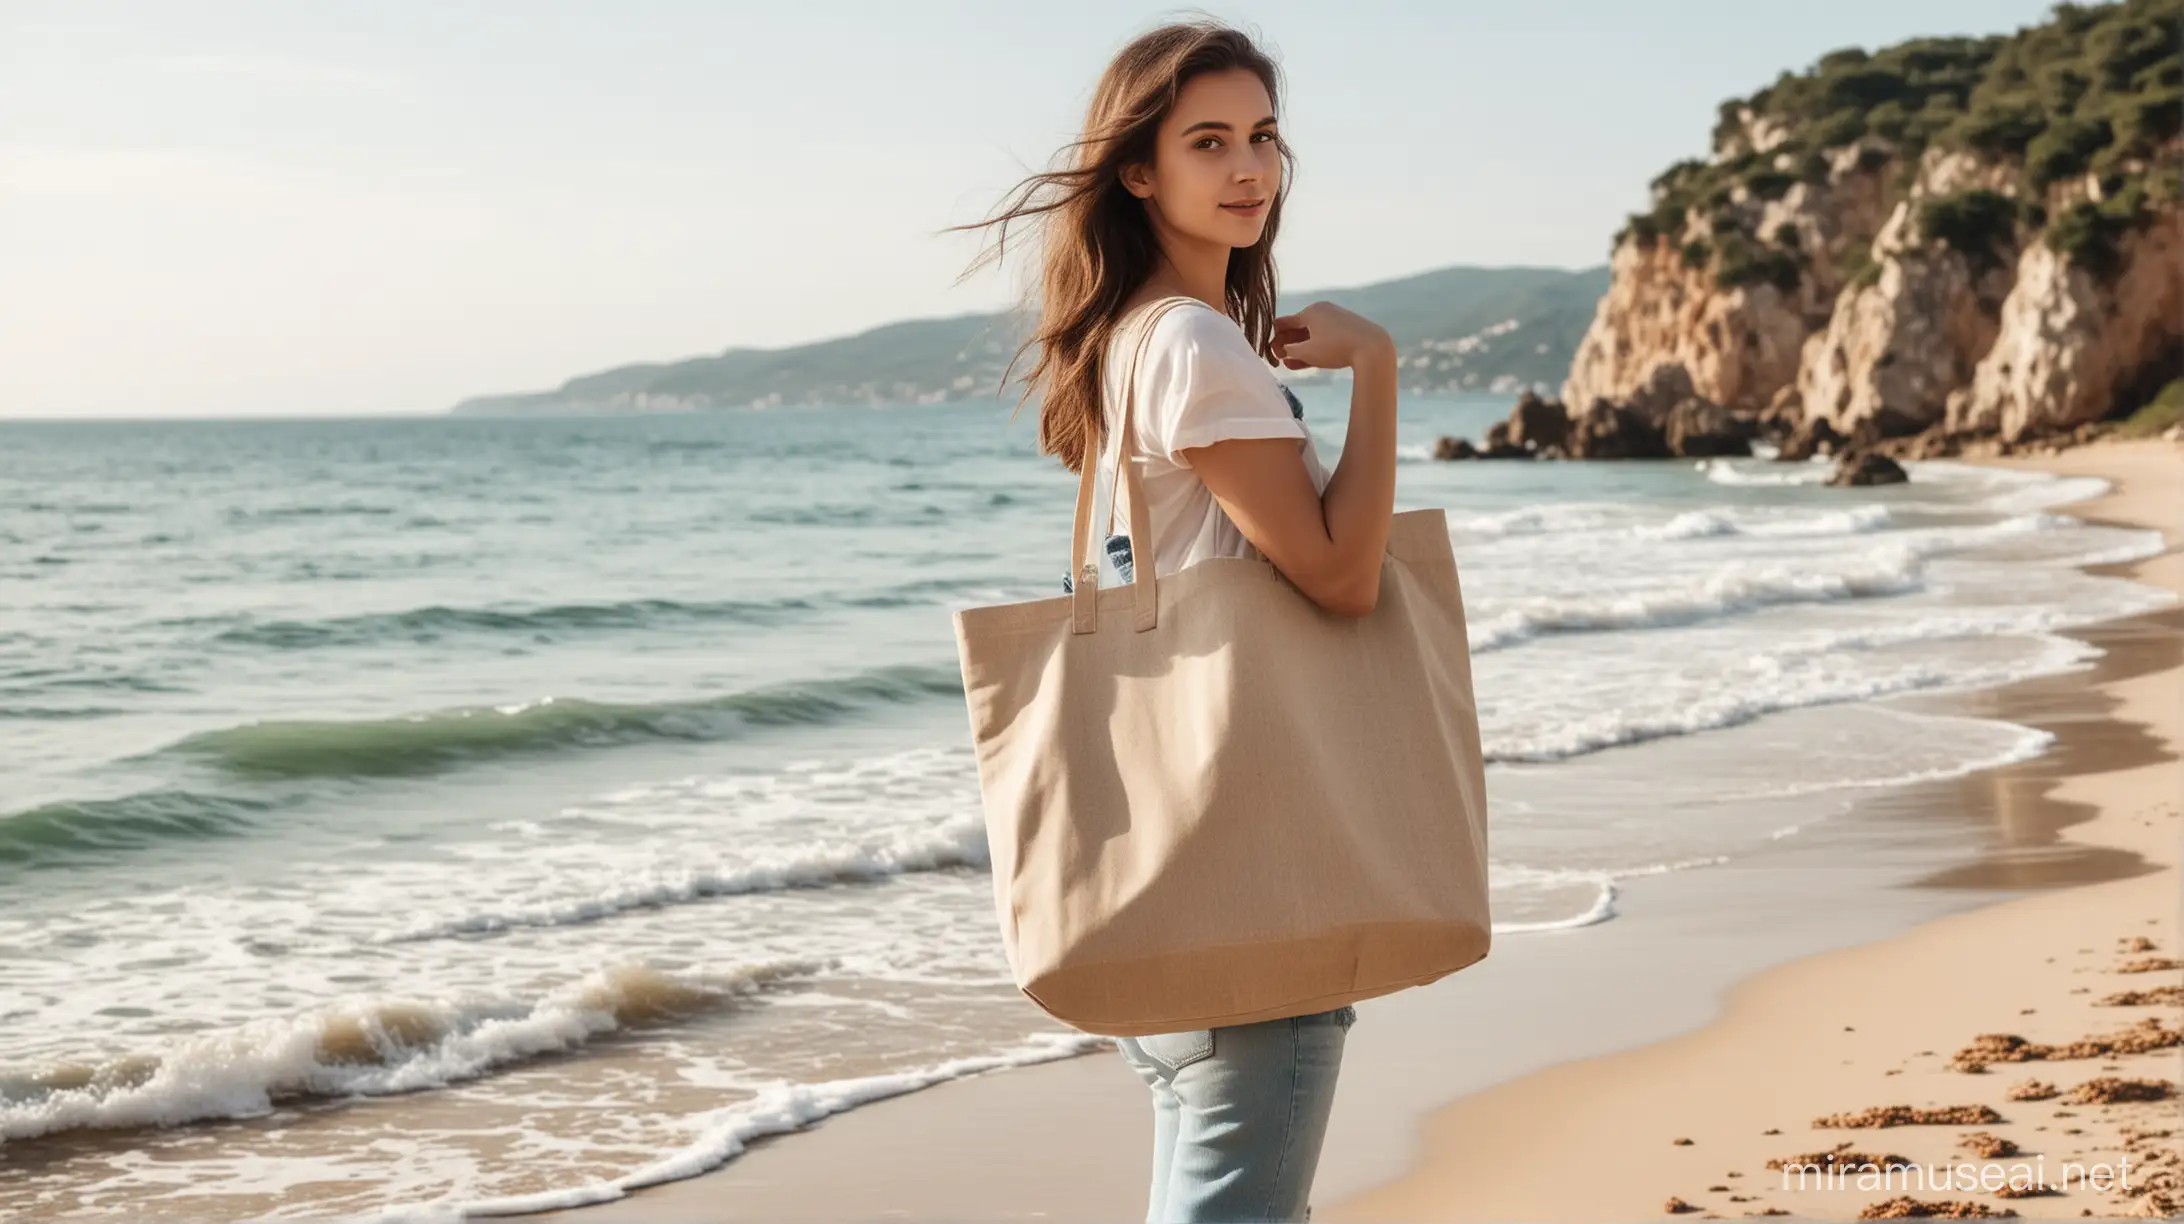 Stylish Young Woman with Tote Bag Enjoying Beach Scenery